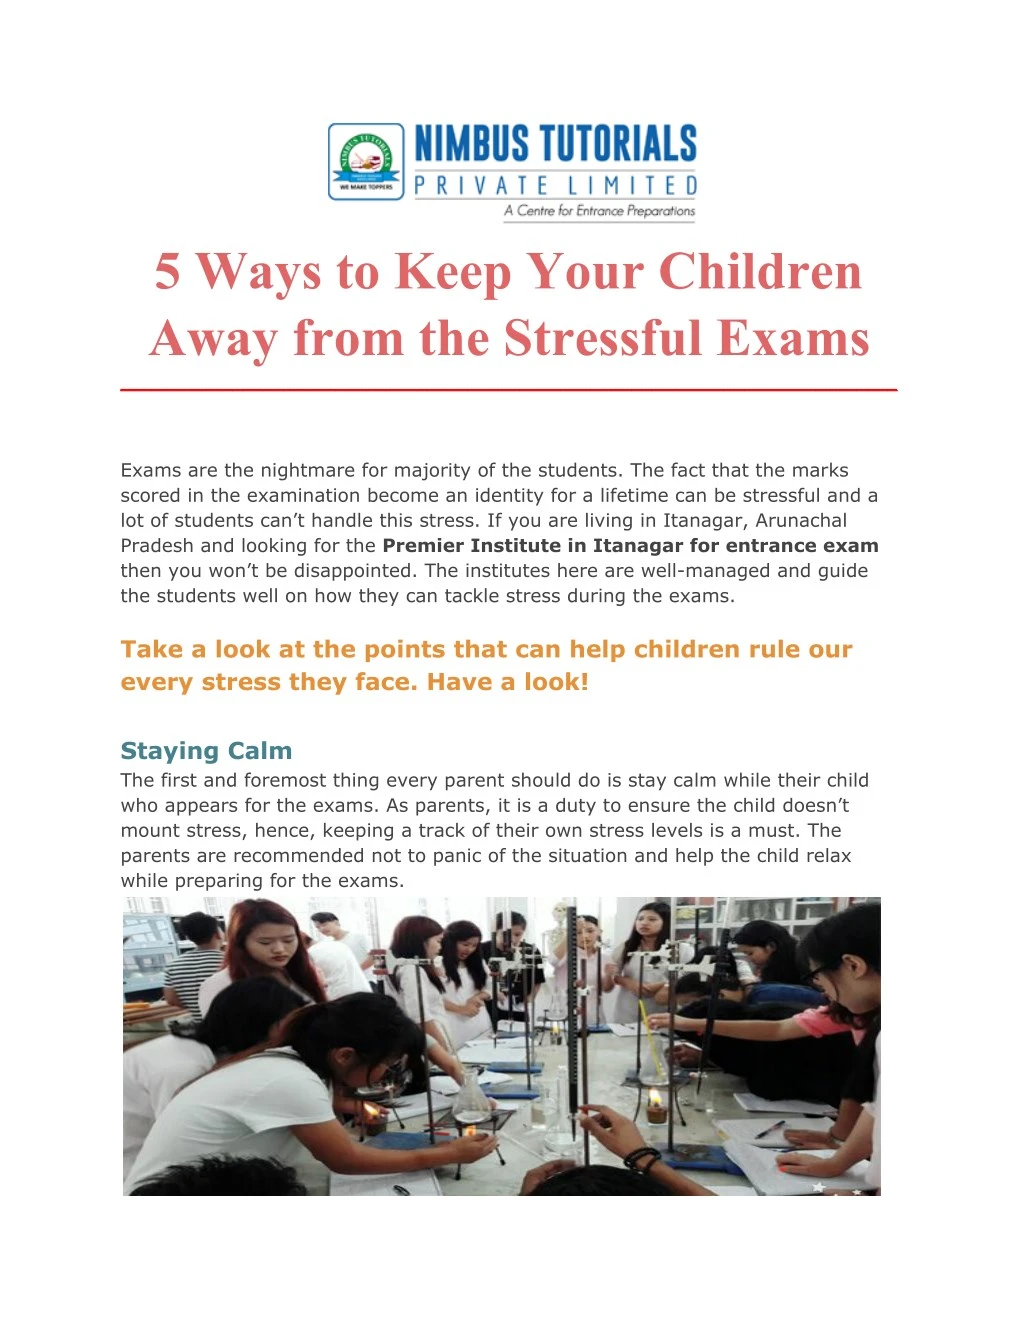 5 ways to keep your children away from